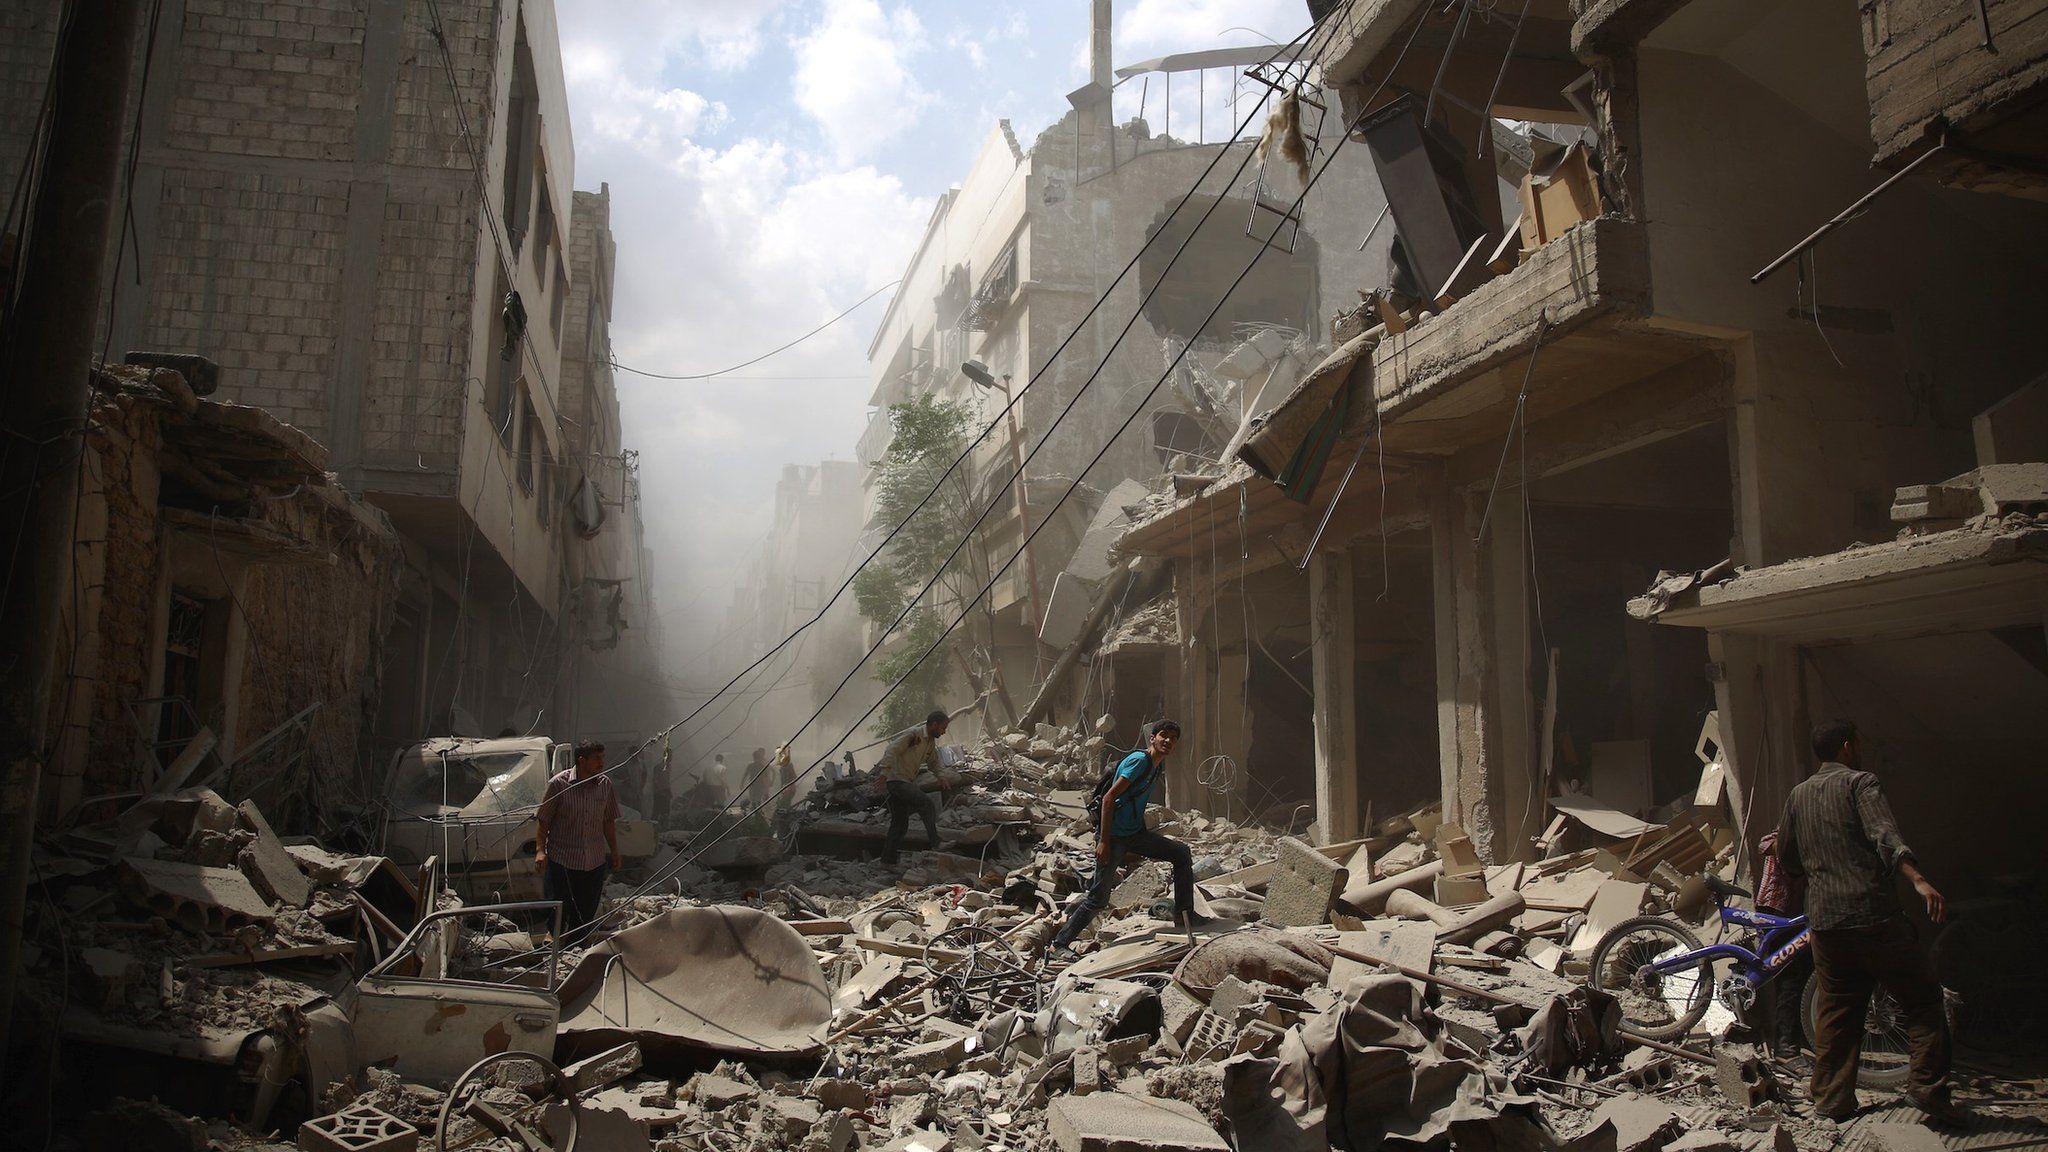 Damage in the rebel-held area of Douma, Syria, on 30 August 2015